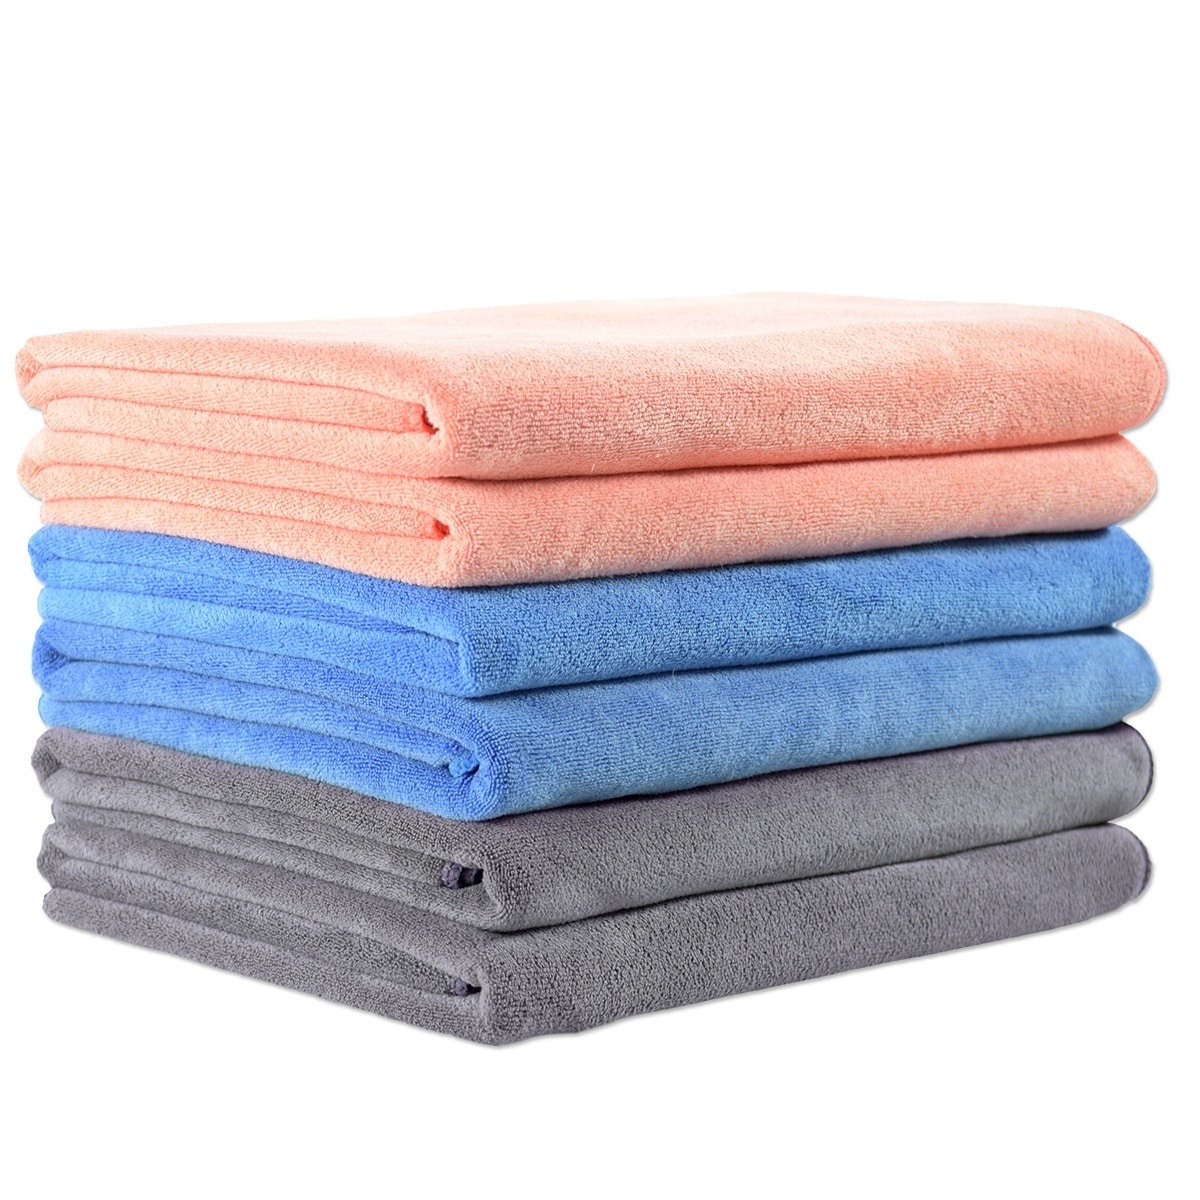 White Pack of 6 Large Bath Towels 100% Cotton 27x55 Highly Absorbent